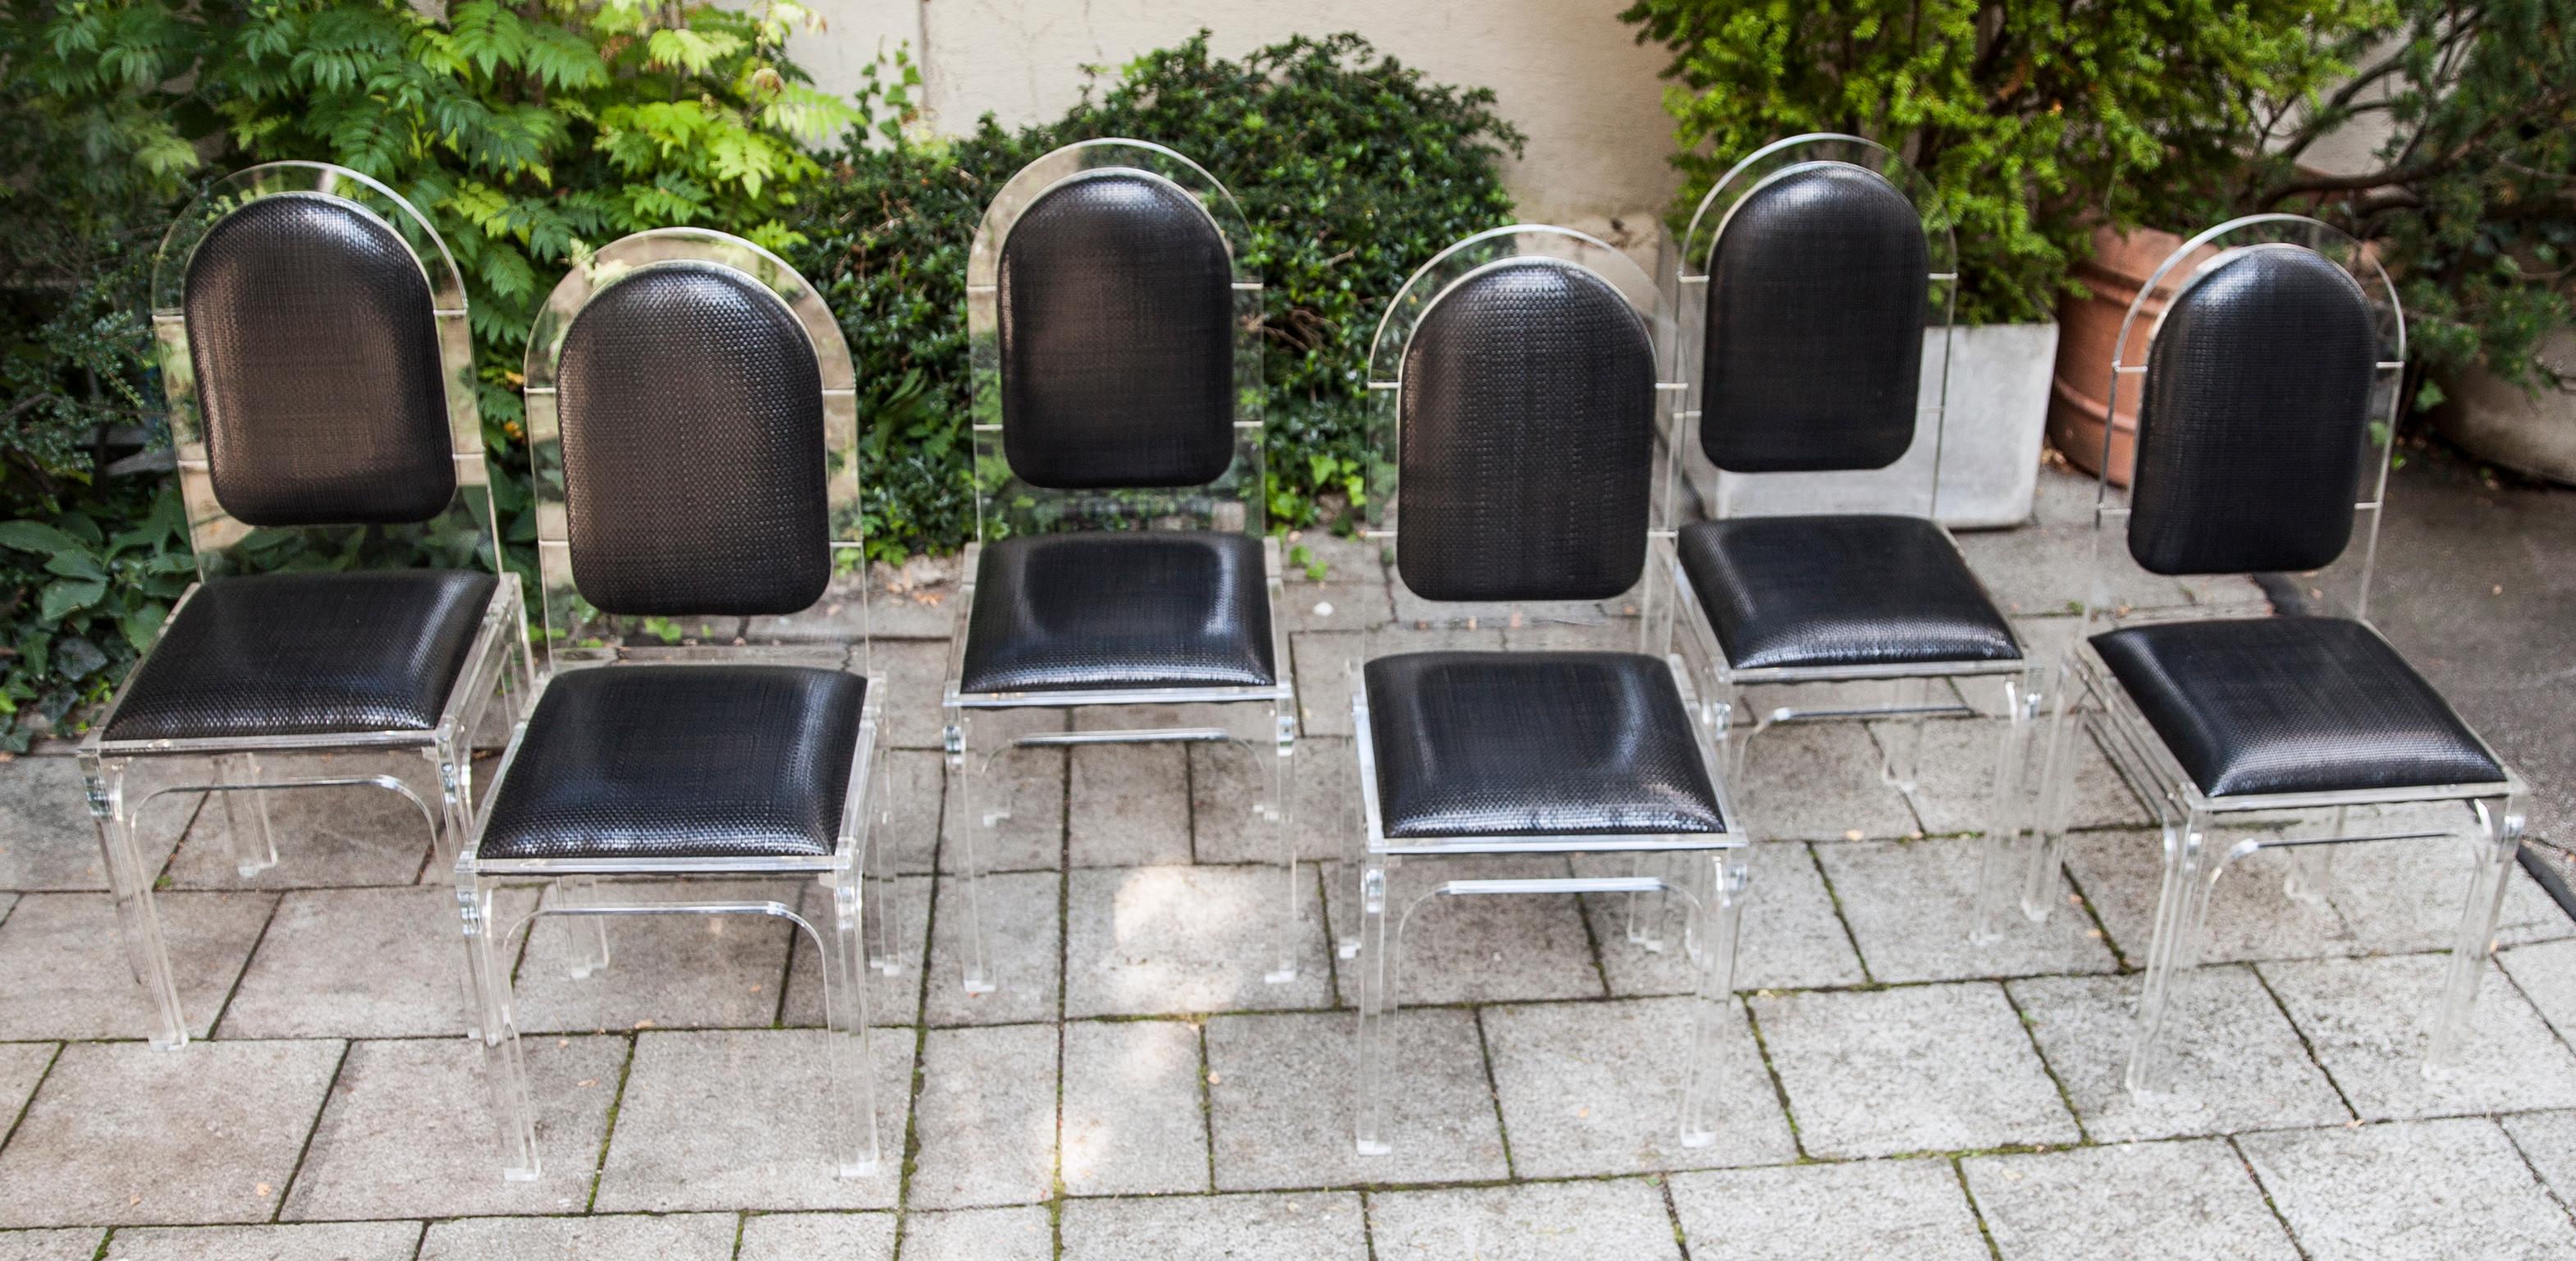 Set of 6 exclusive chairs, jet set style, plexiglass with black leather covers black from Bottega Veneta
Italy, 1978.